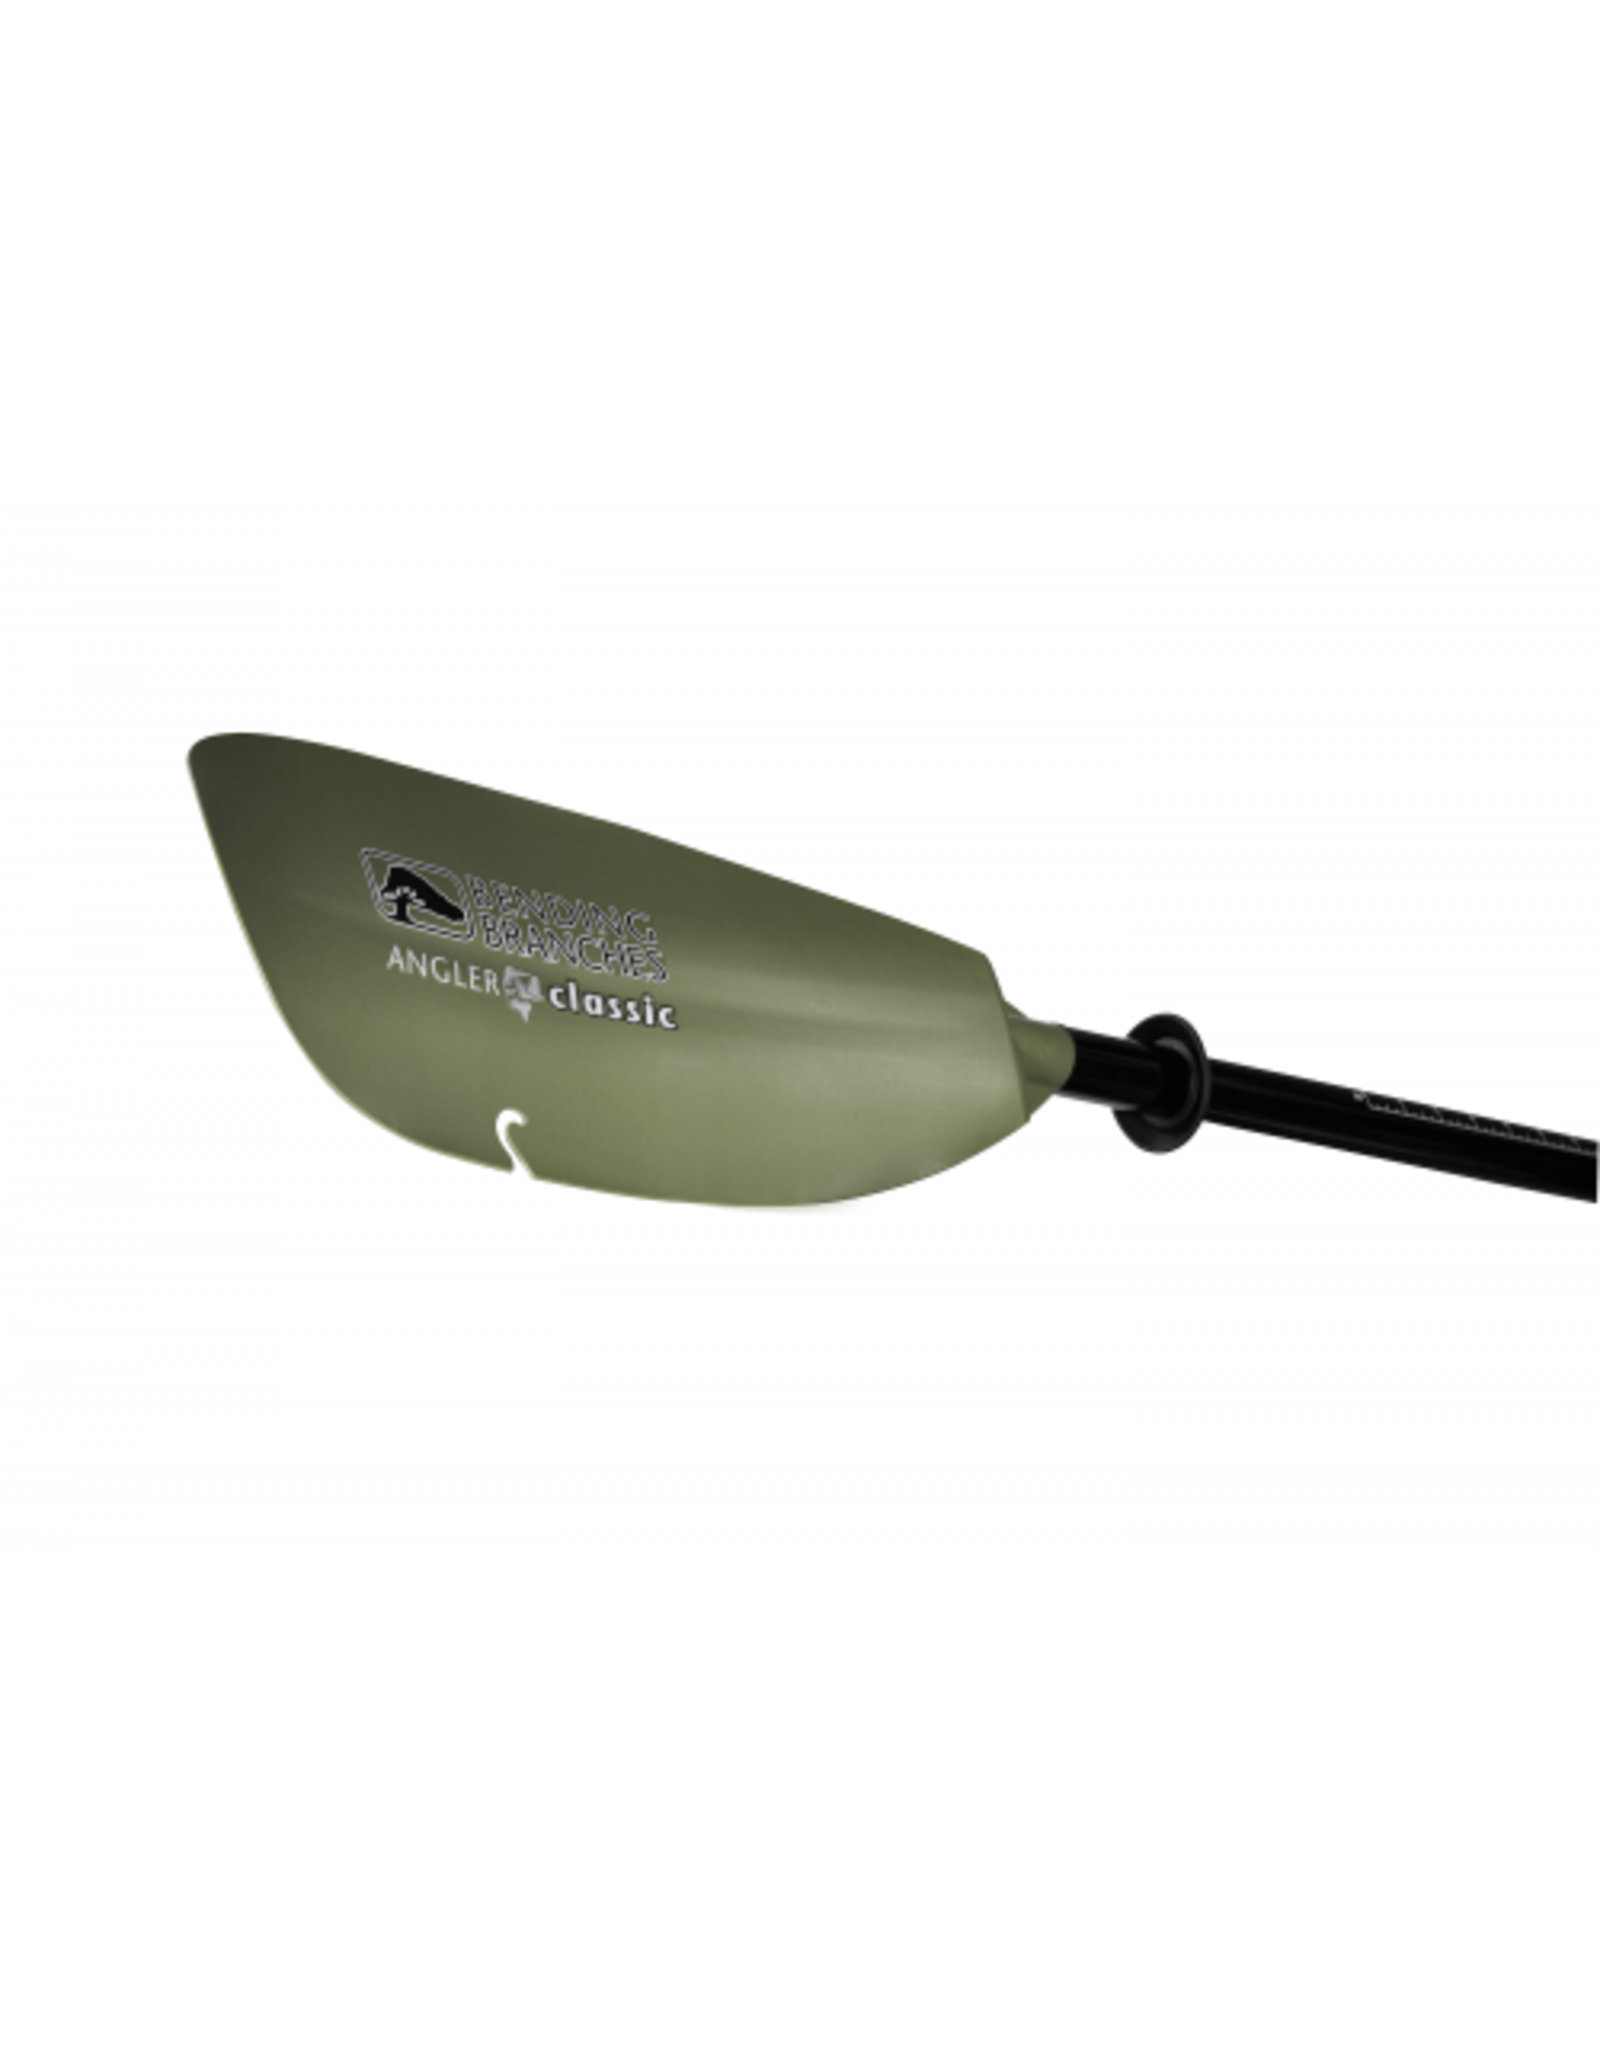 Bending Branches Bending Branches Paddle Angler Classic